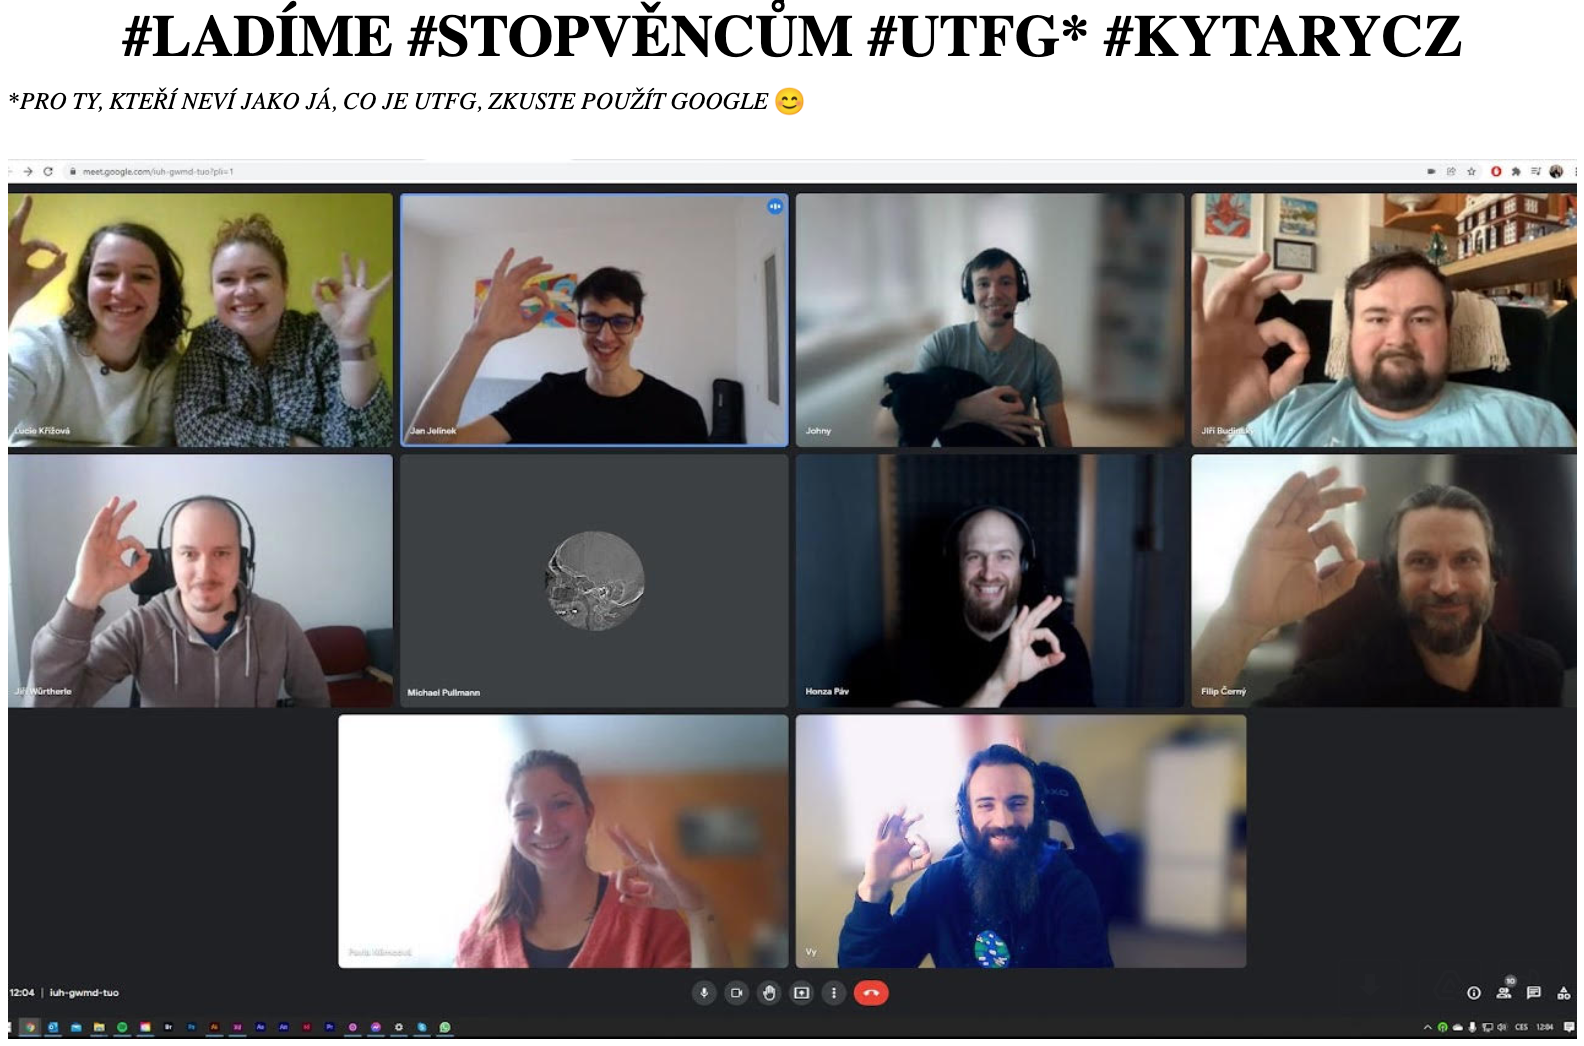 Kytary.cz organized video sessions to help the team transition to GWS